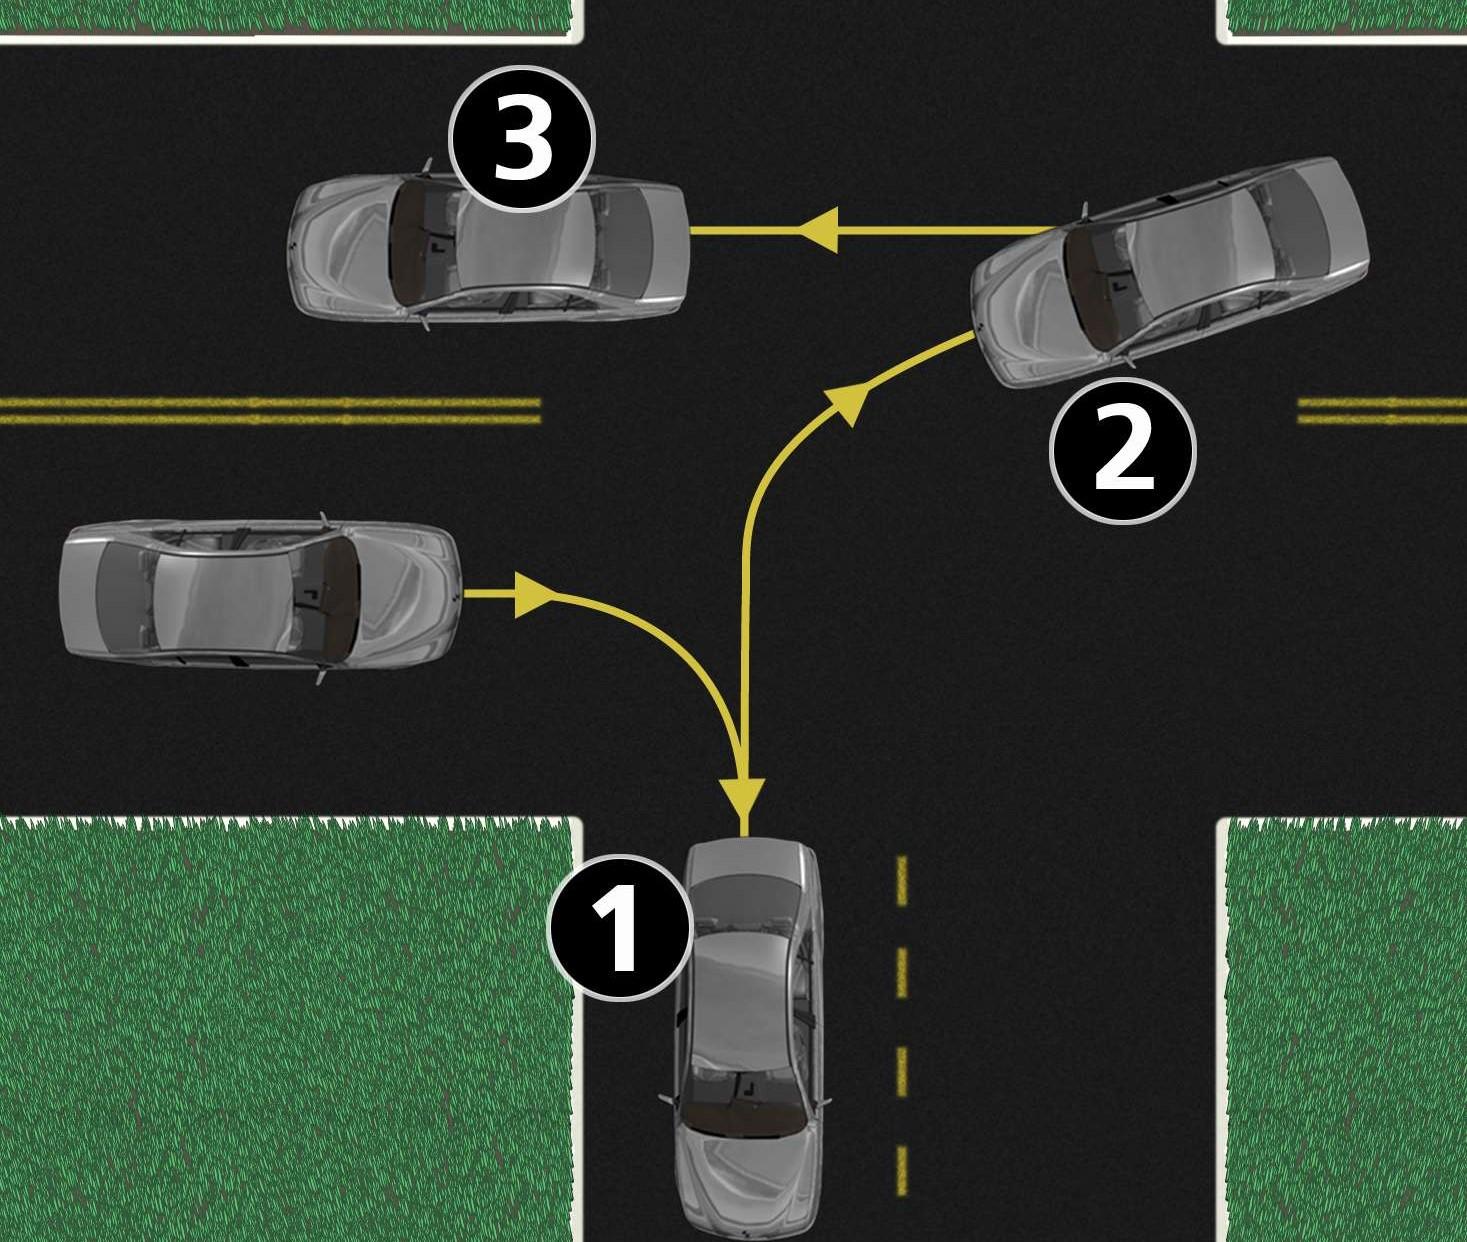 How To Turn Of A Car How To Do A Three Point Turn In A Safe Way